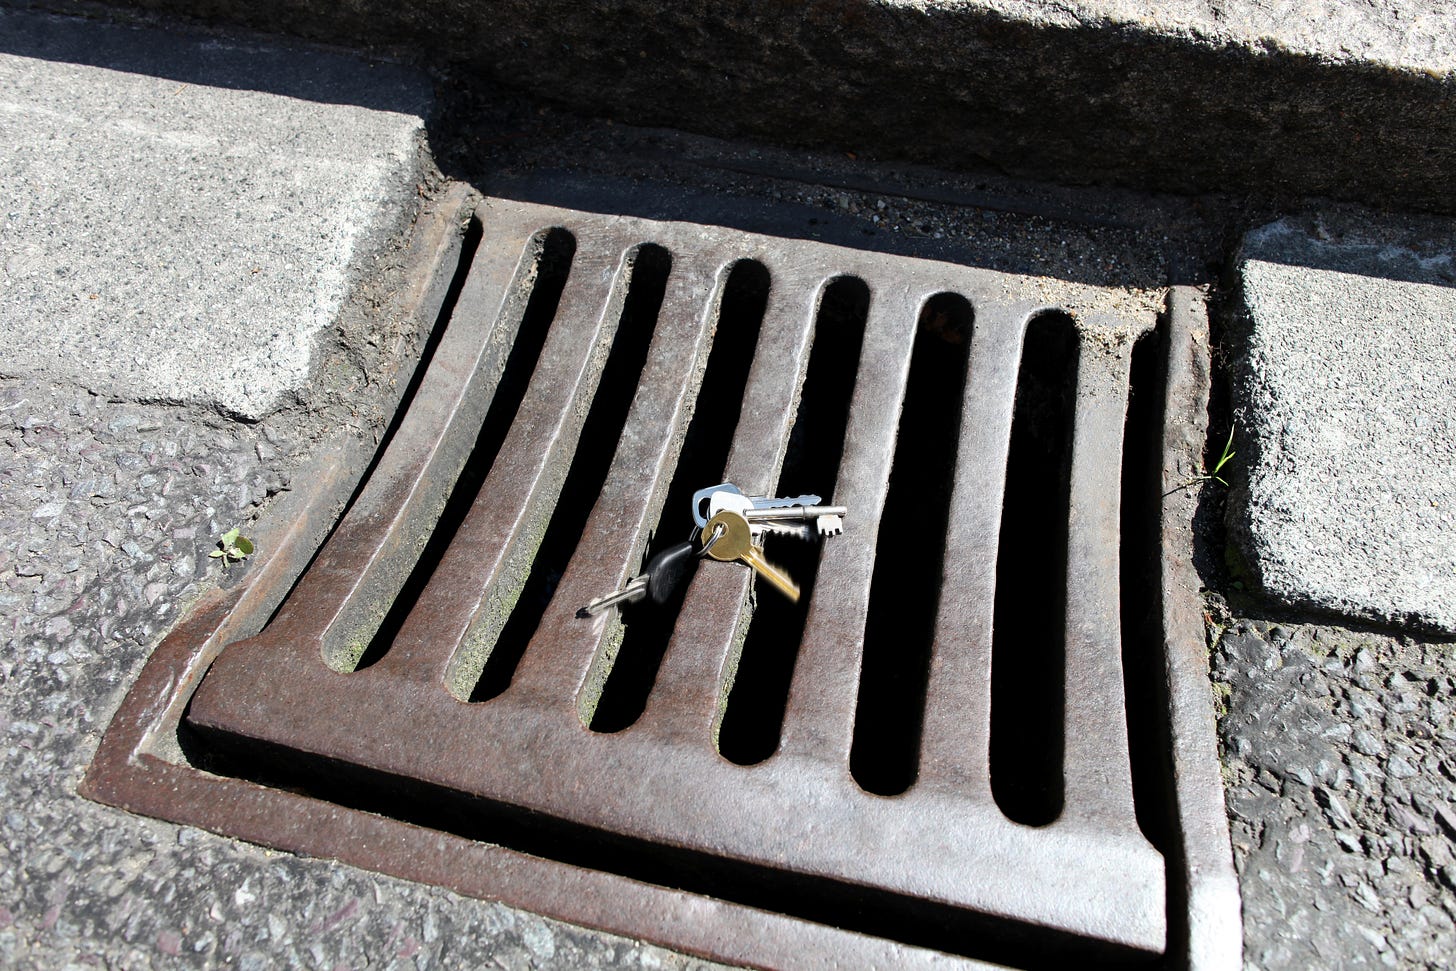 A set of keys resting precariously on a sewer grate